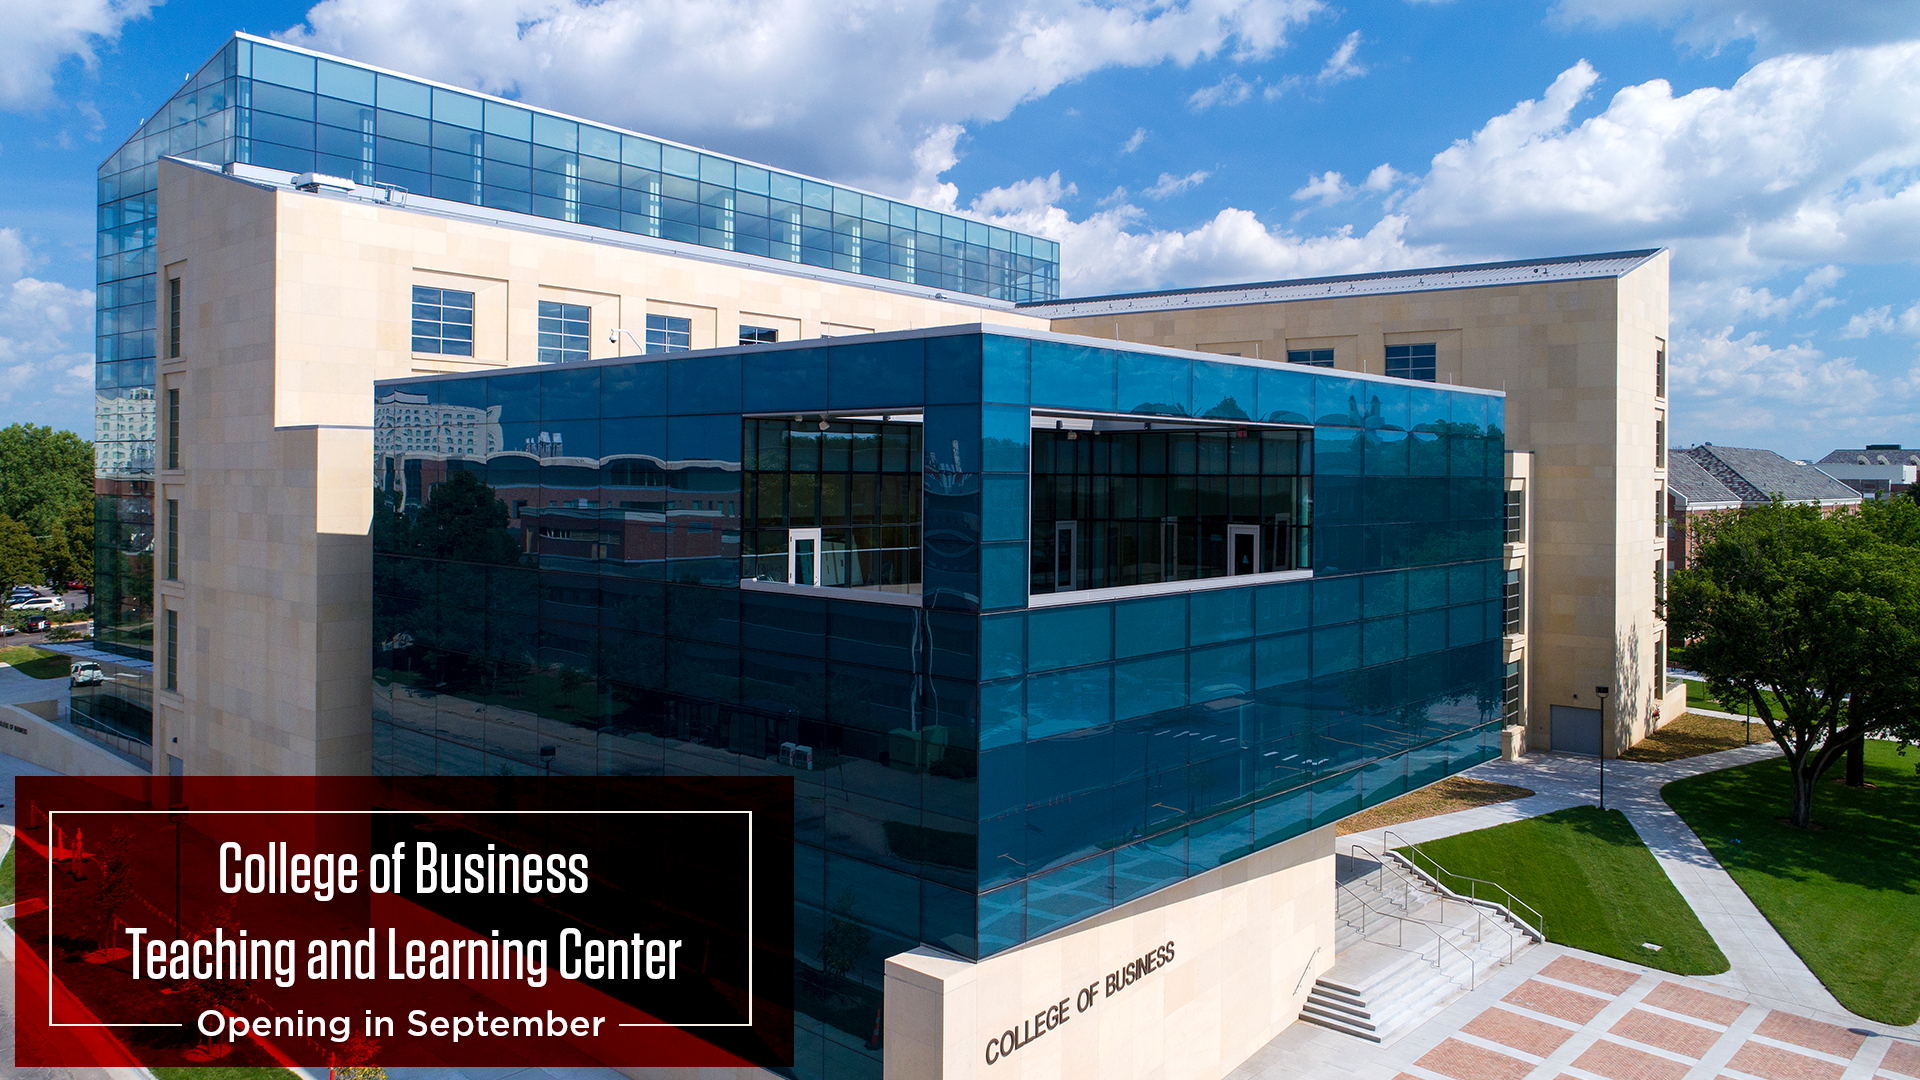 The College of Business Teaching and Learning Center opens in September.